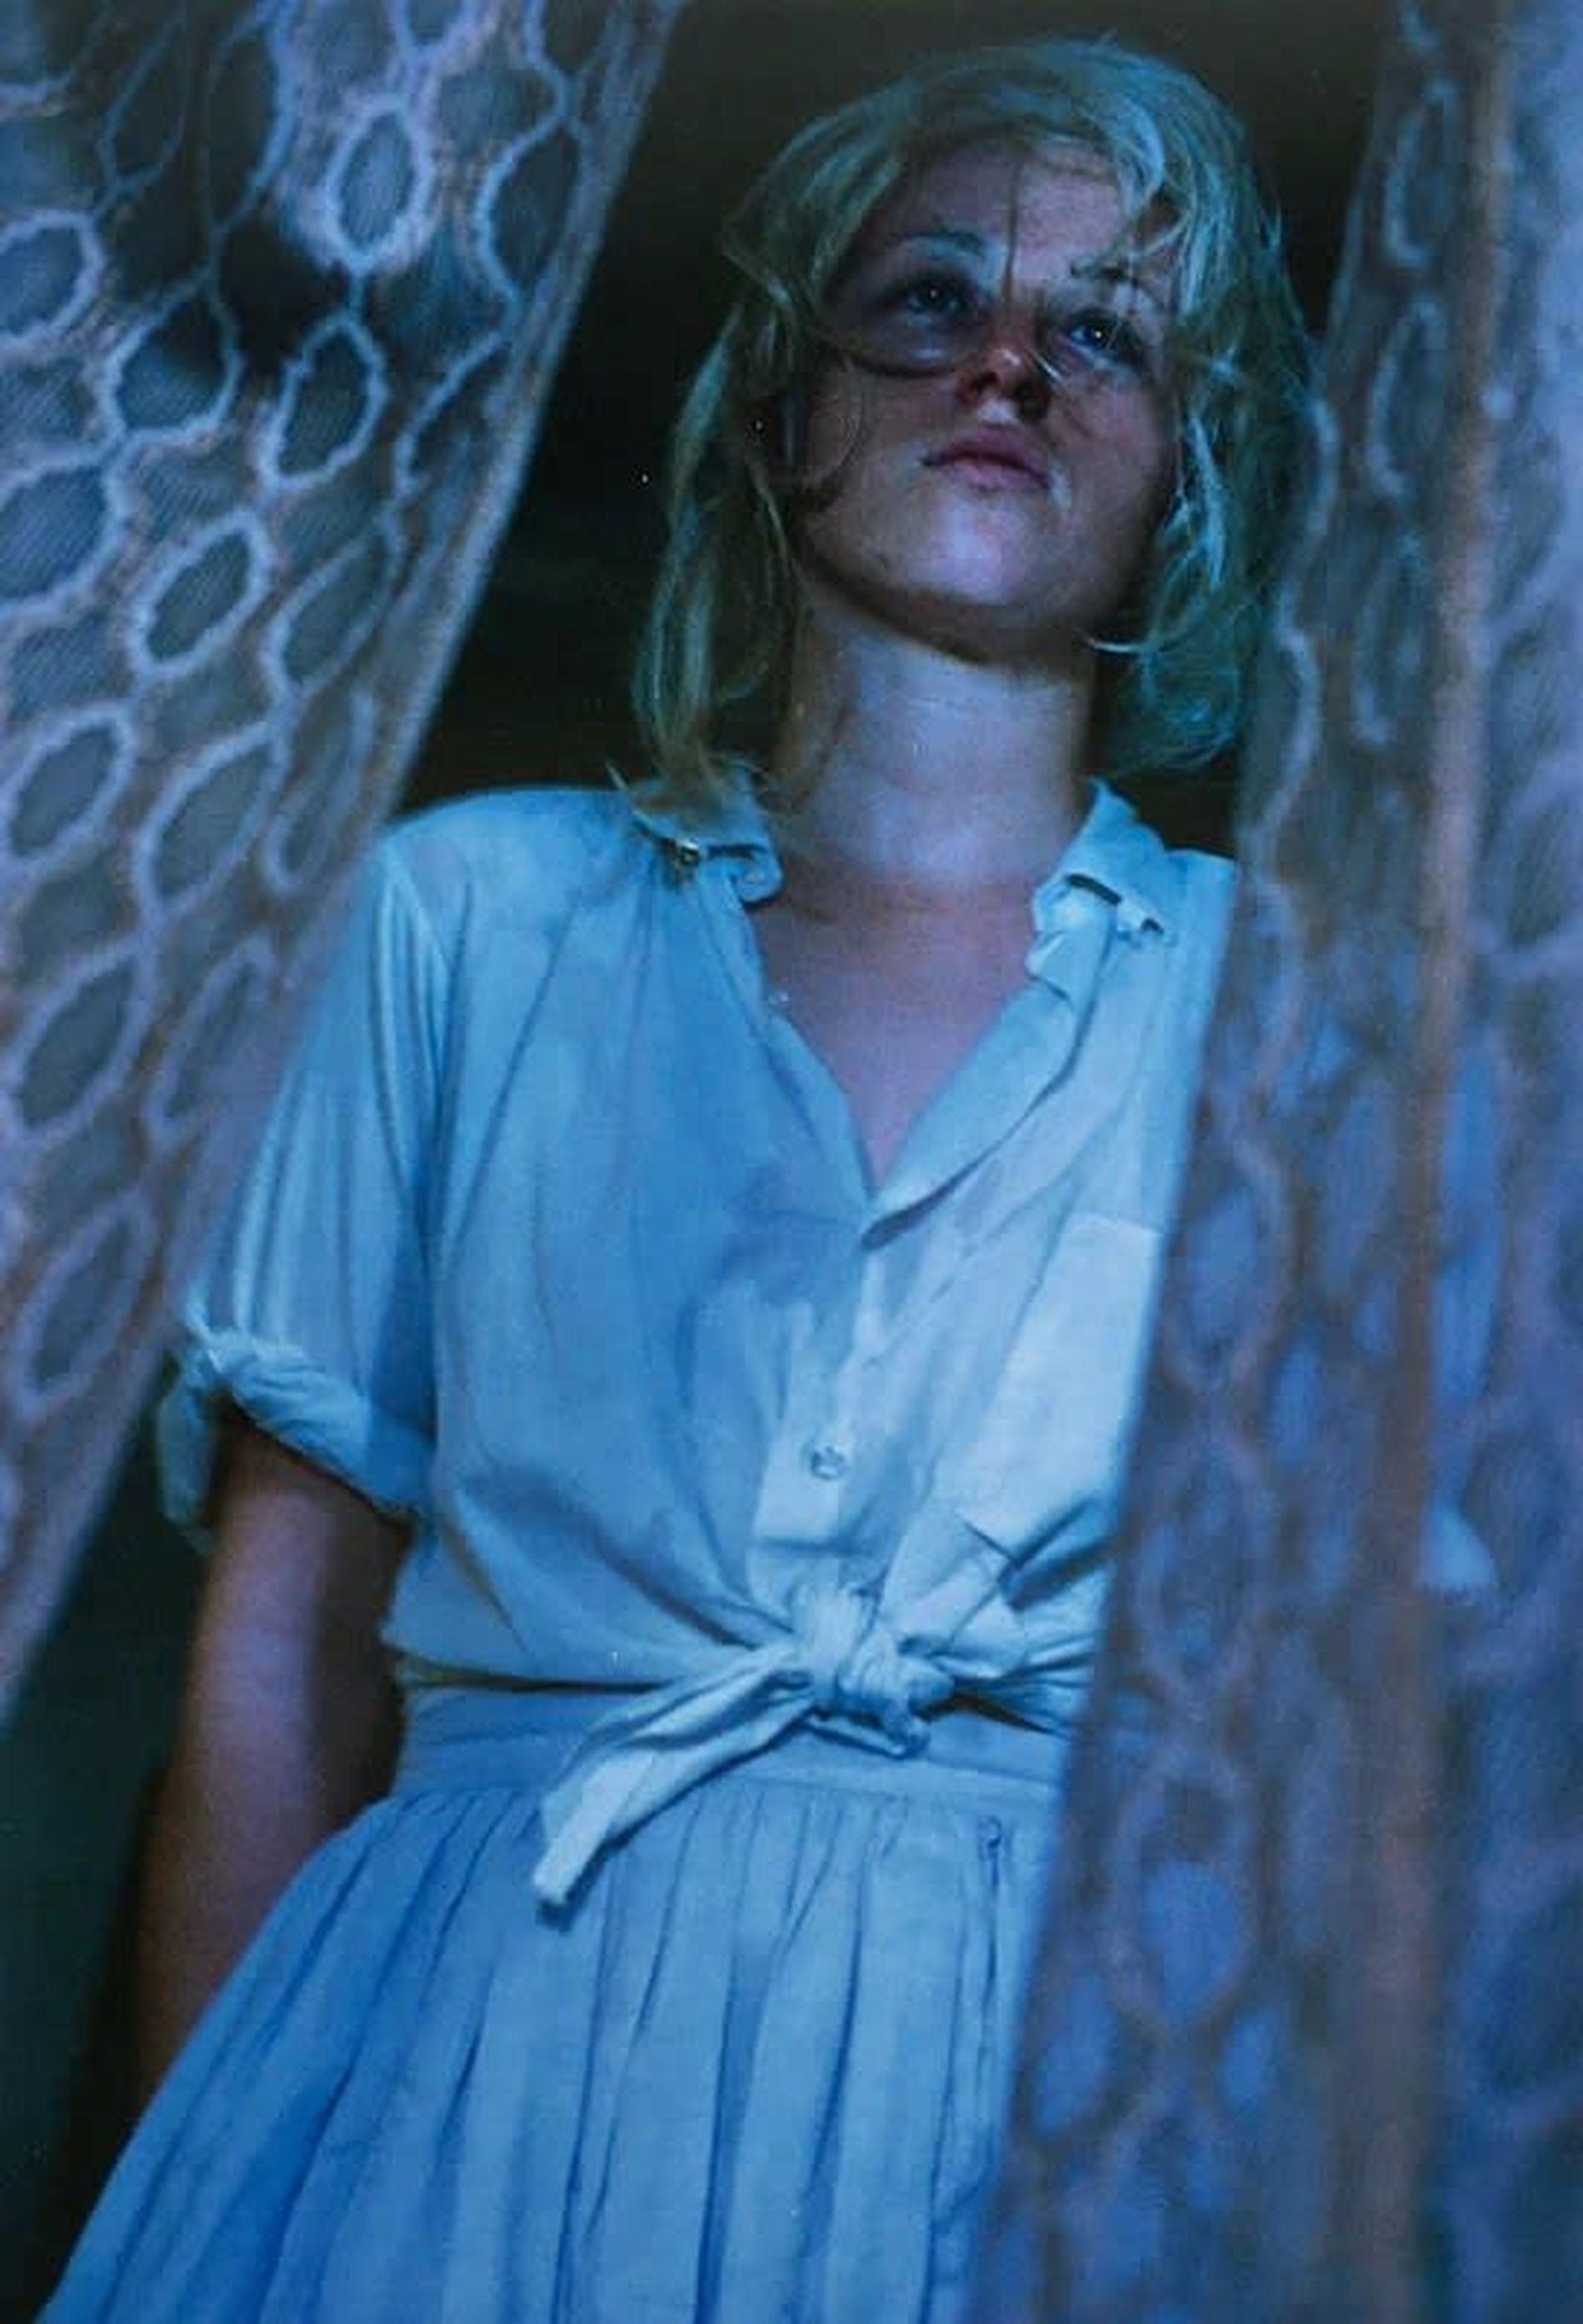 Untitled #114 

By Cindy Sherman

Cindy Sherman is a renowned American photographer and conceptual artist, widely celebrated for her ground breaking work in contemporary art. Best known for her transformative self-portraits that explore identity,